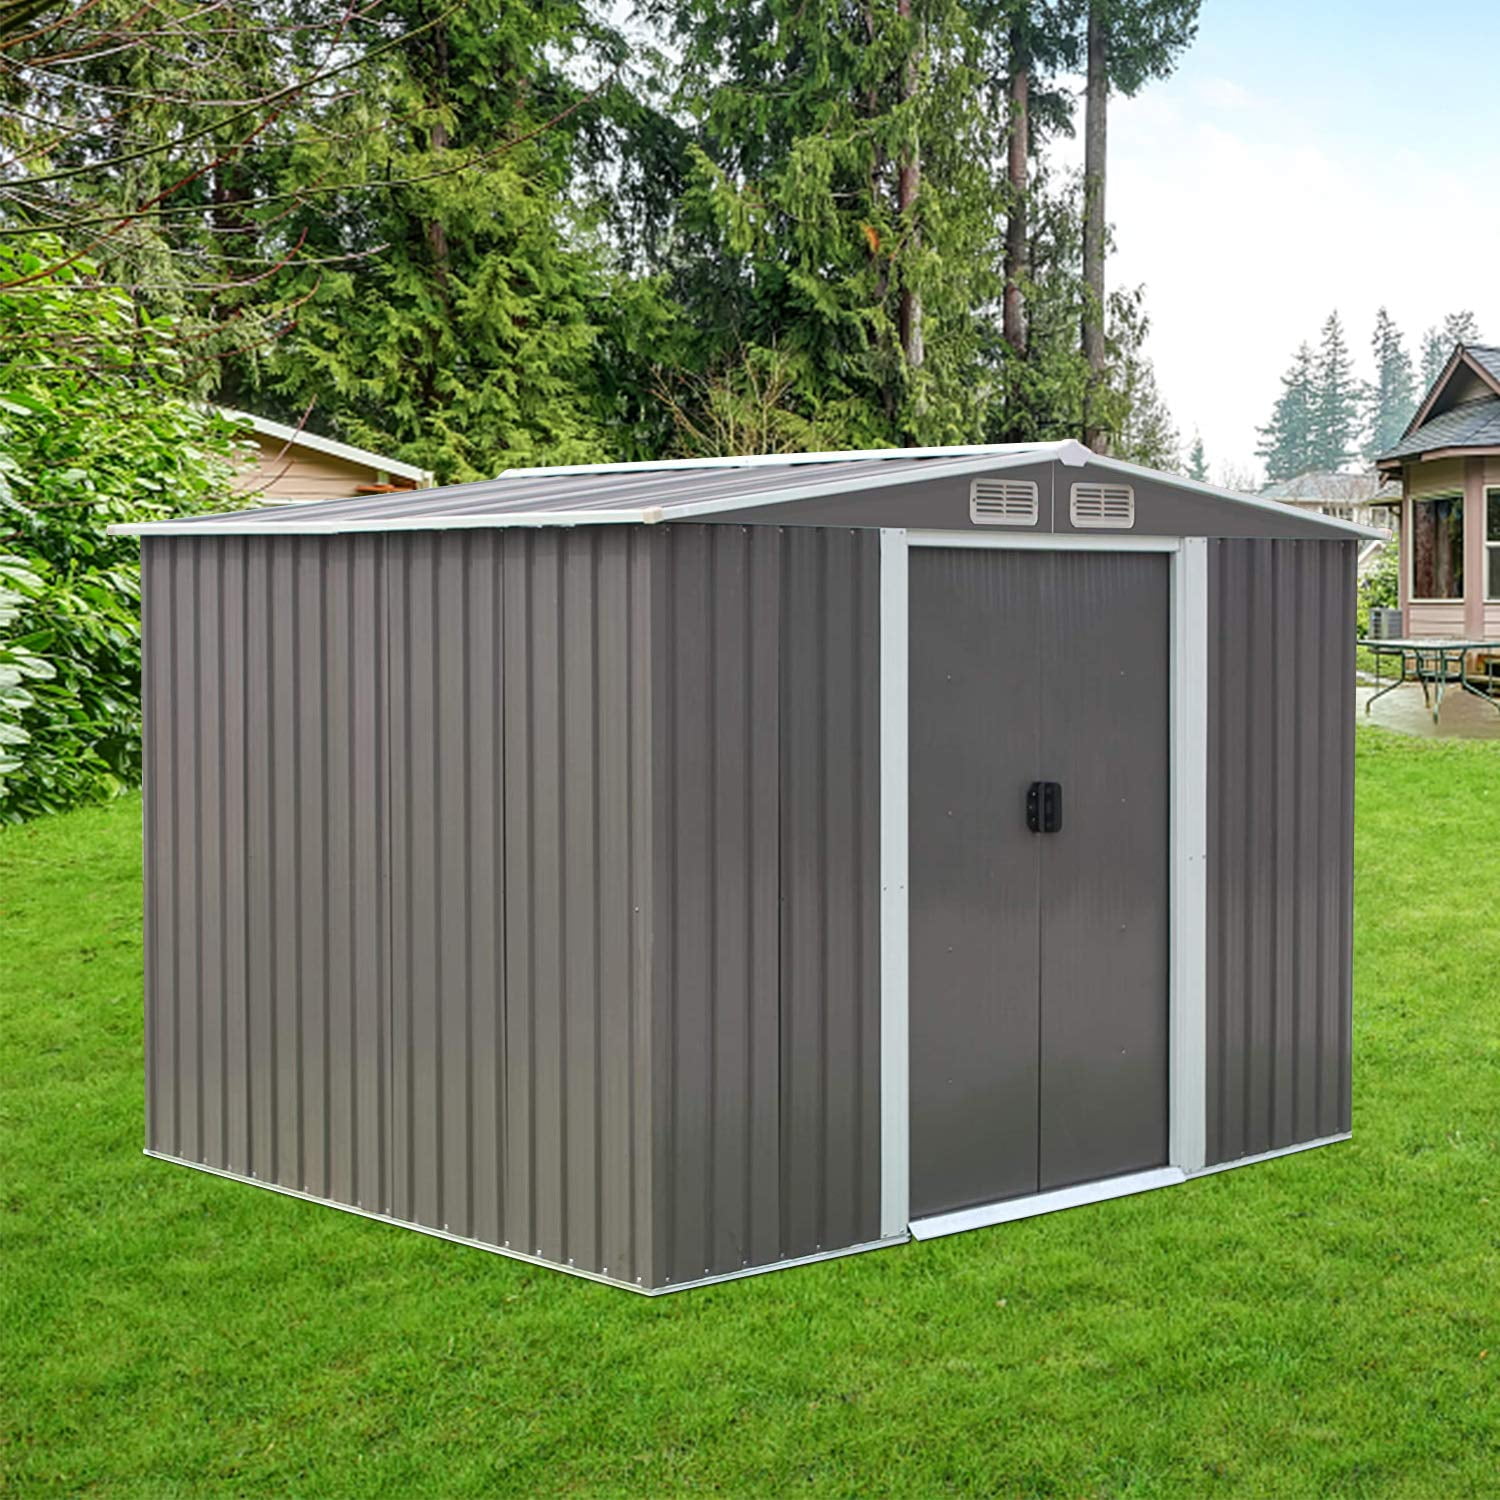 Kinsuite 8' x 6' Metal Outdoor Storage Shed, Utility Tool Shed for ...